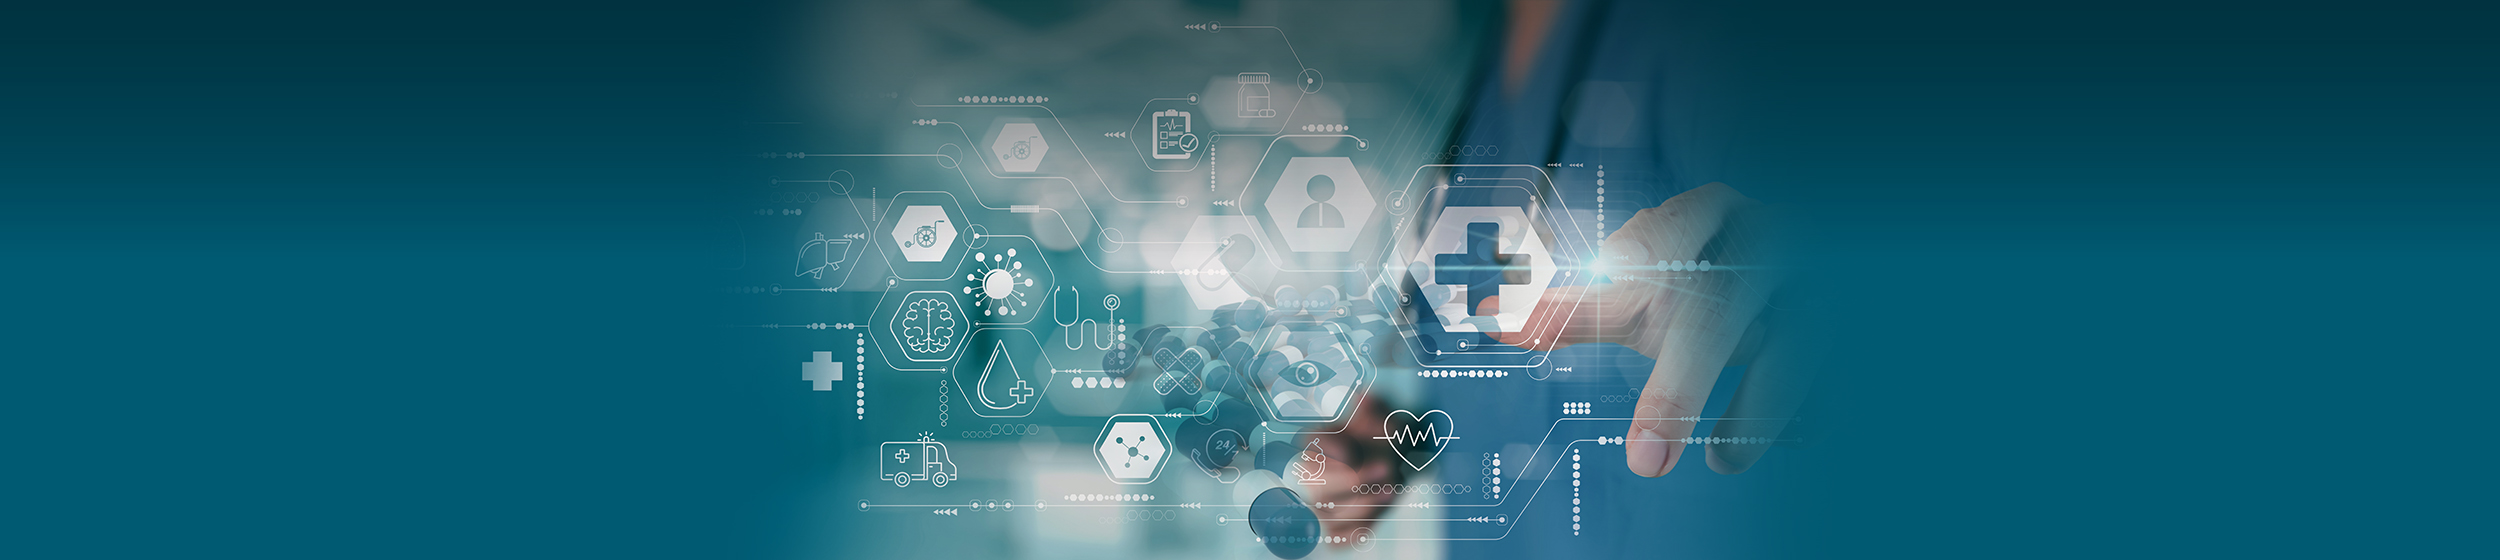 Banner-Micrium OS – Why It Should Be The First Choice For Building Connected Medical Devices?